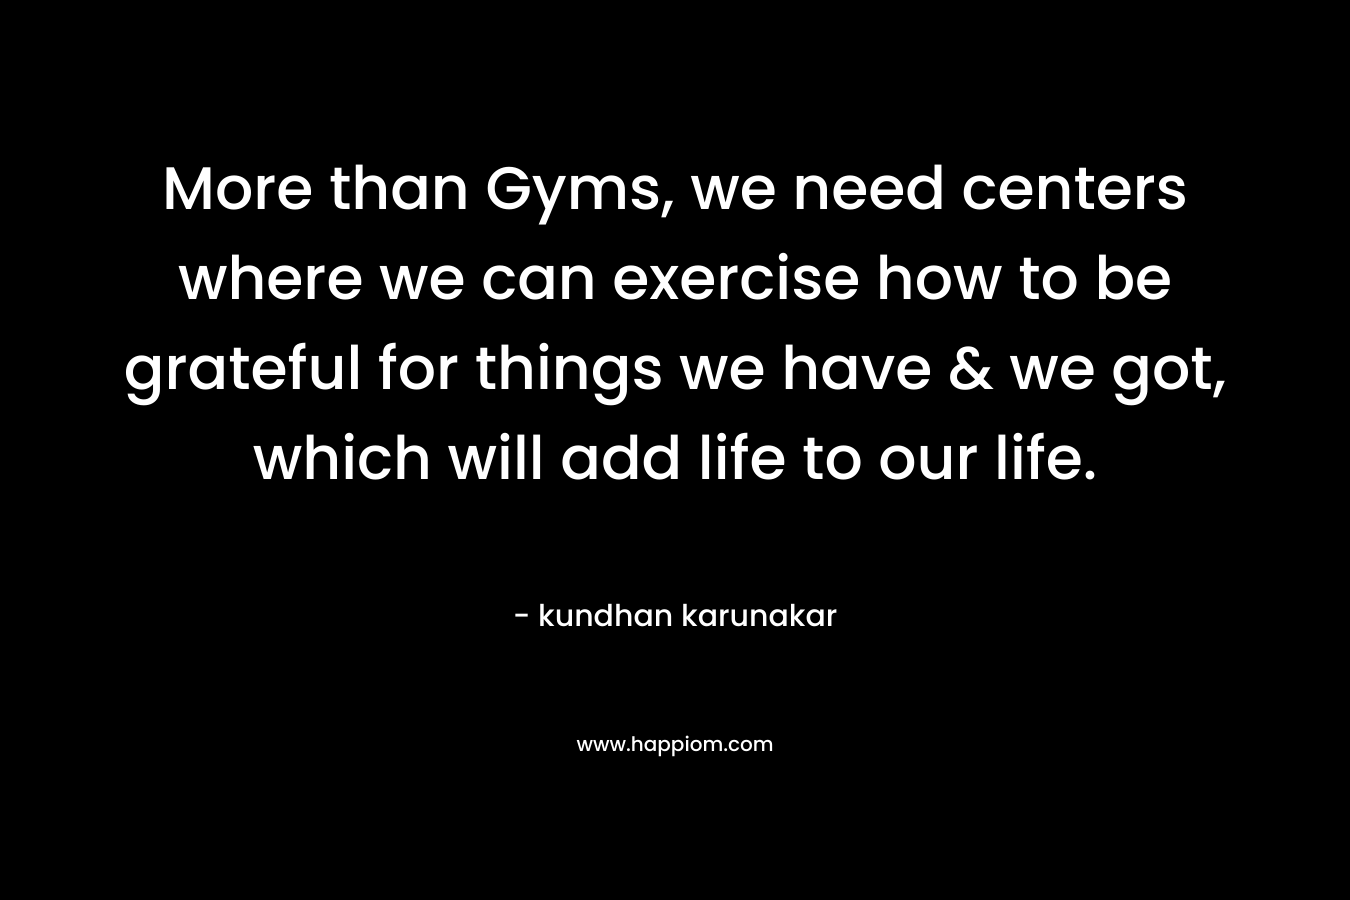 More than Gyms, we need centers where we can exercise how to be grateful for things we have & we got, which will add life to our life. – kundhan karunakar